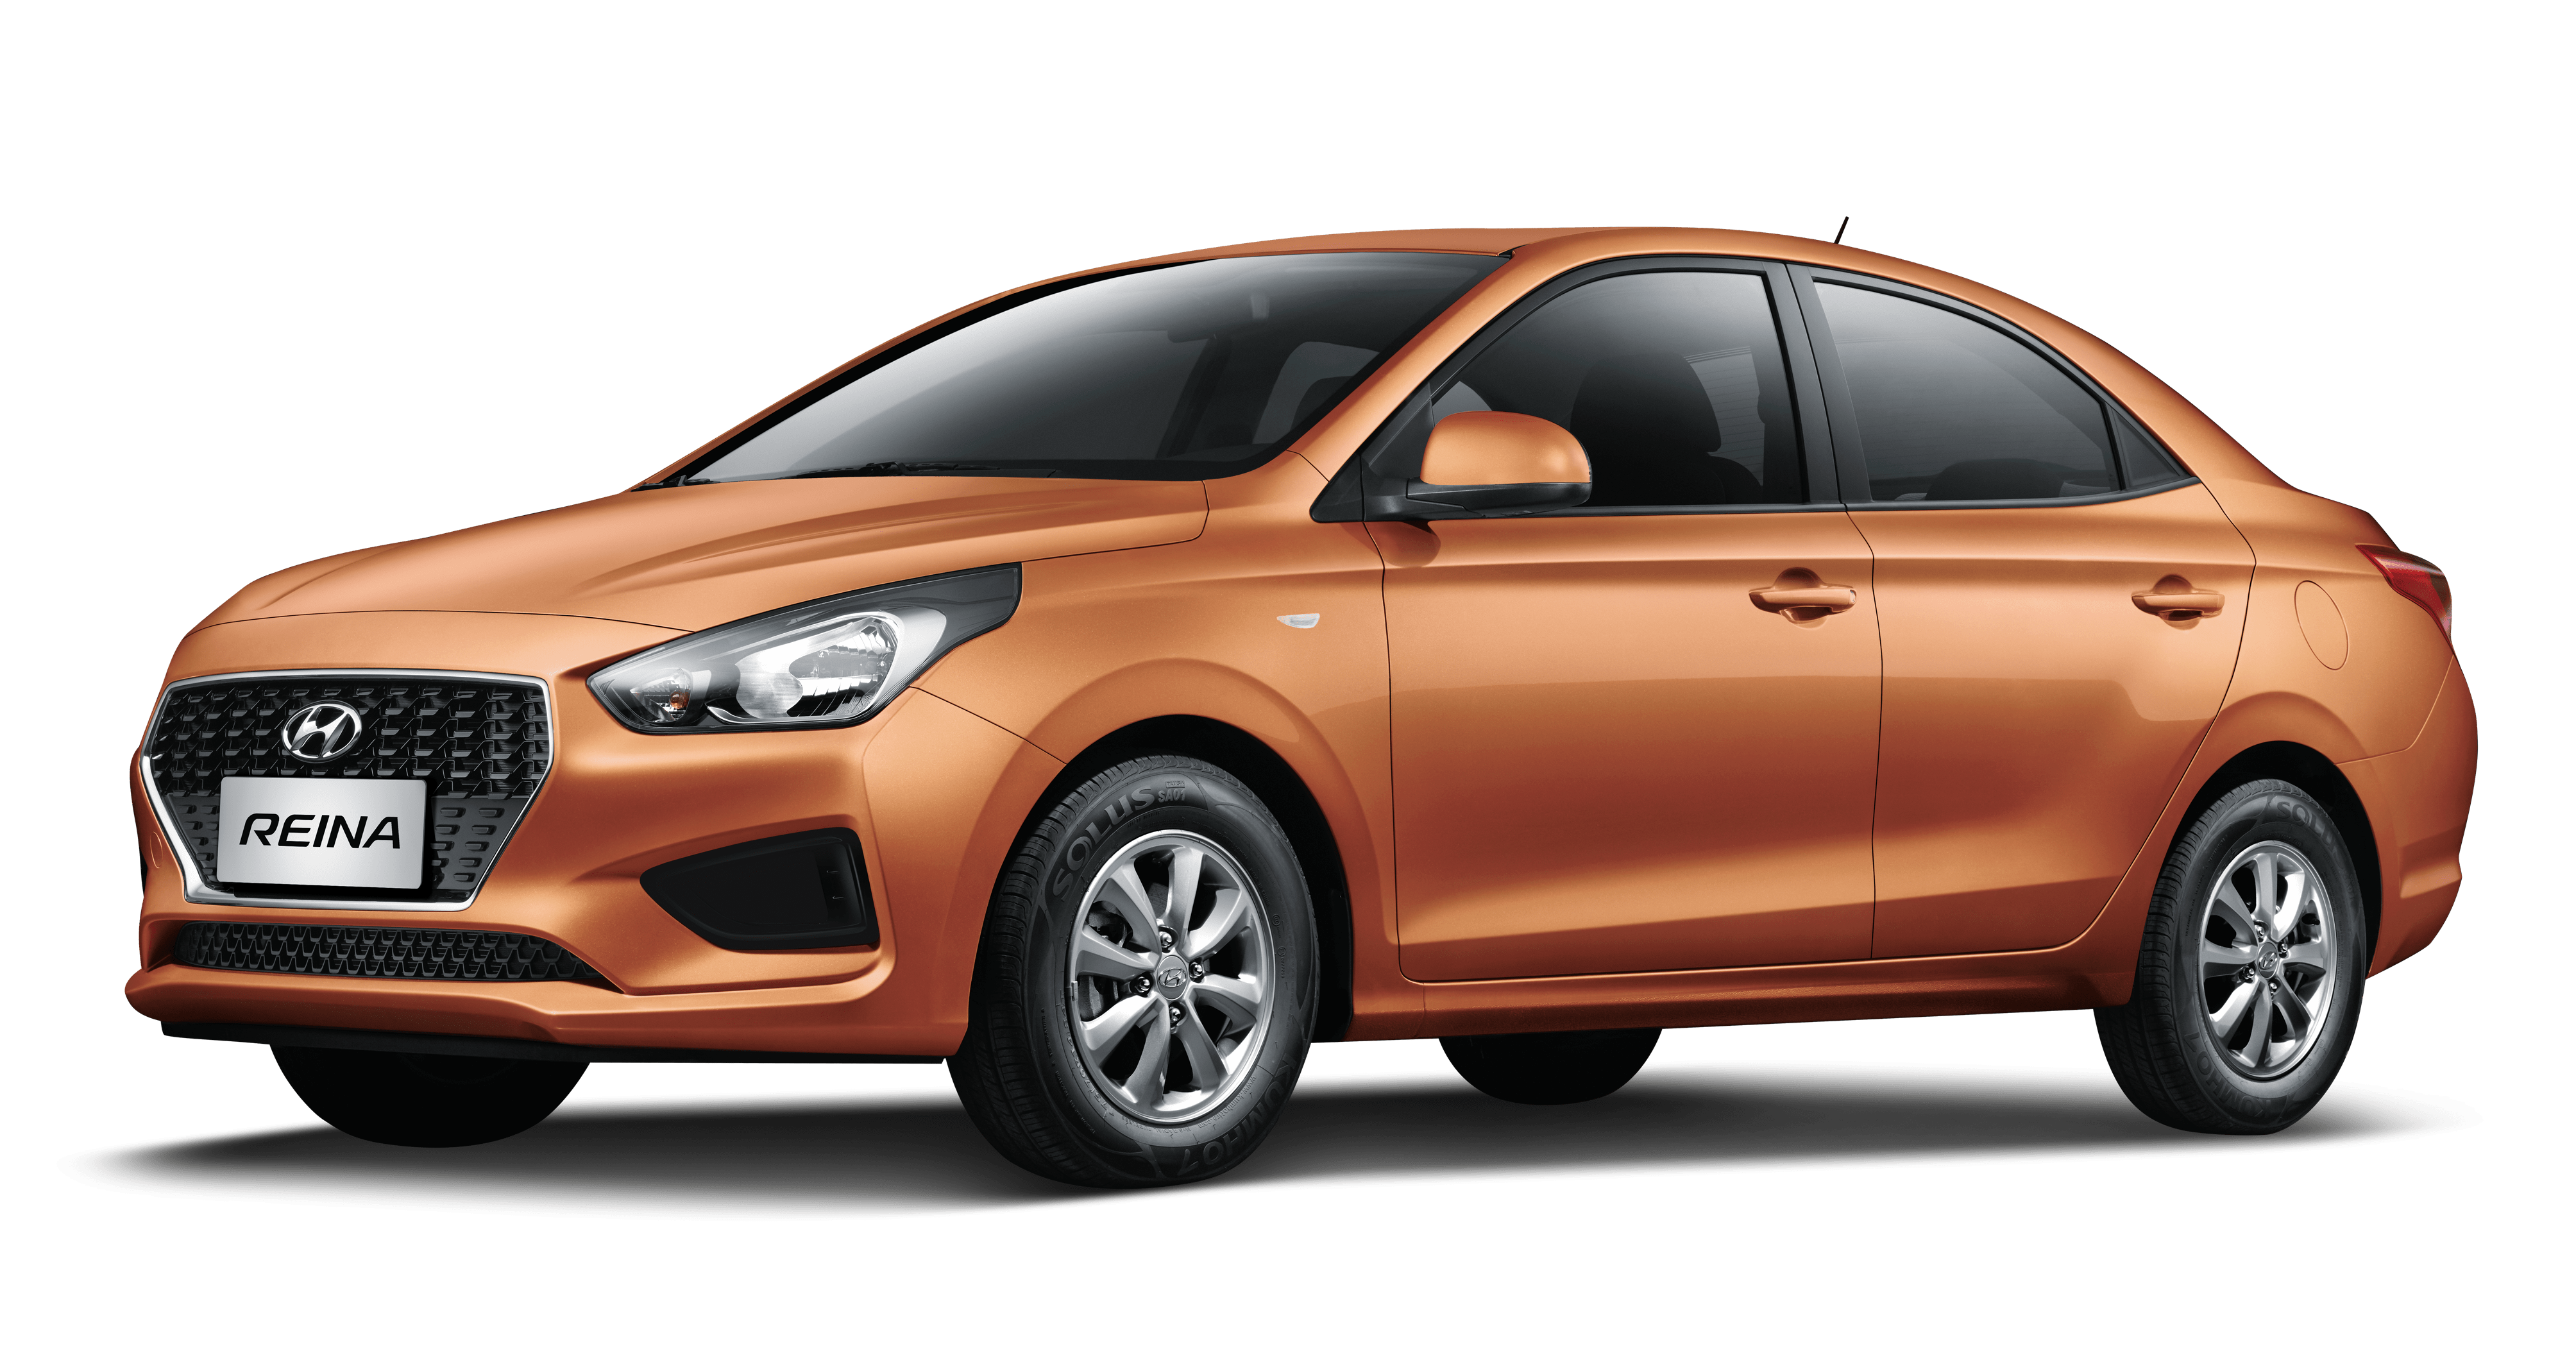 The Hyundai Reina is a car wellsuited for firsttime car owners